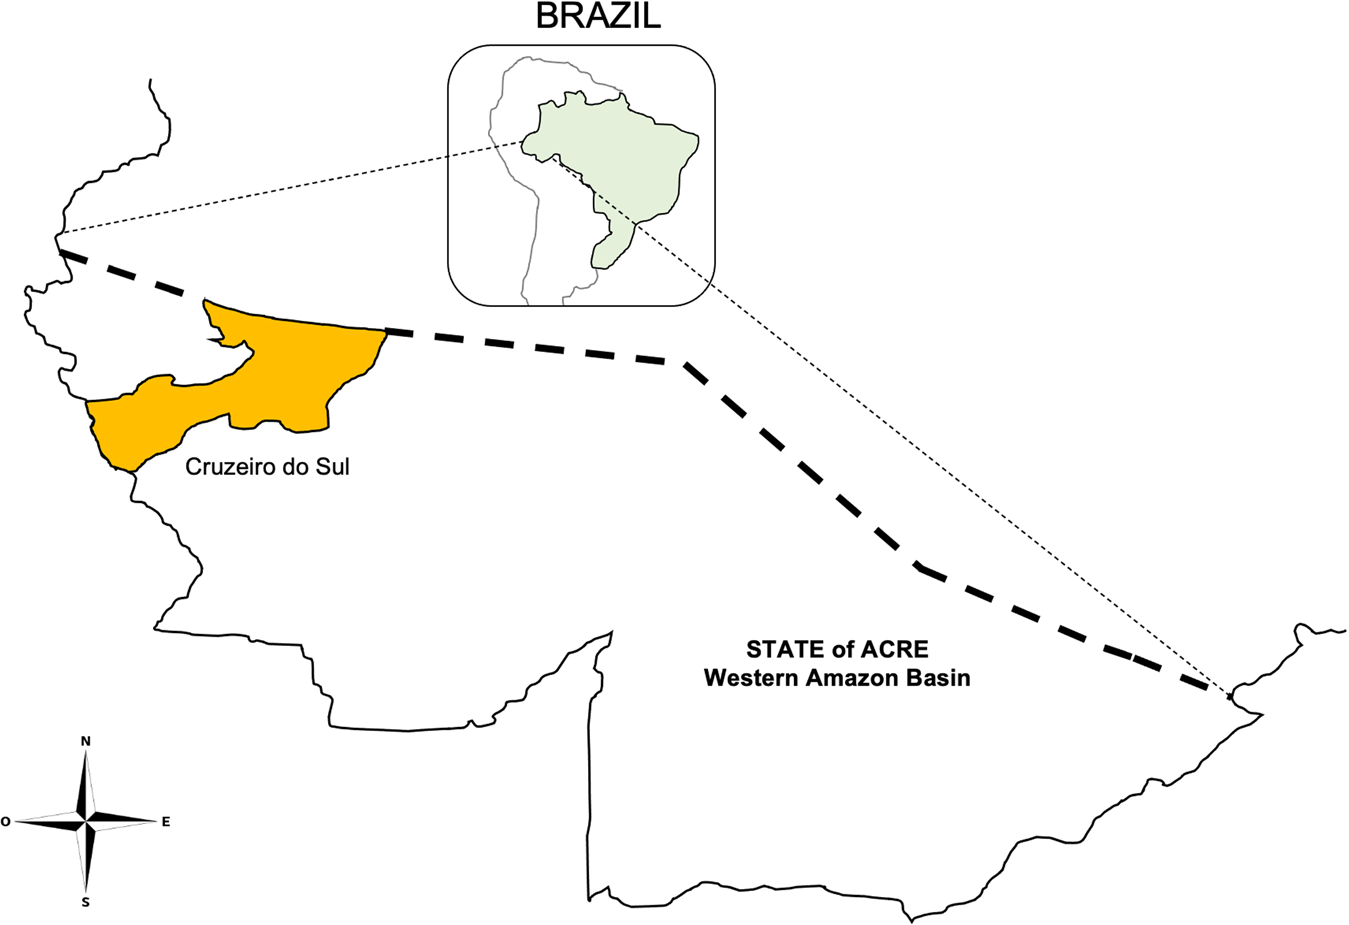 Tropical diseases and risk of hypertension in the Amazon Basin: a  cross-sectional study | Journal of Human Hypertension